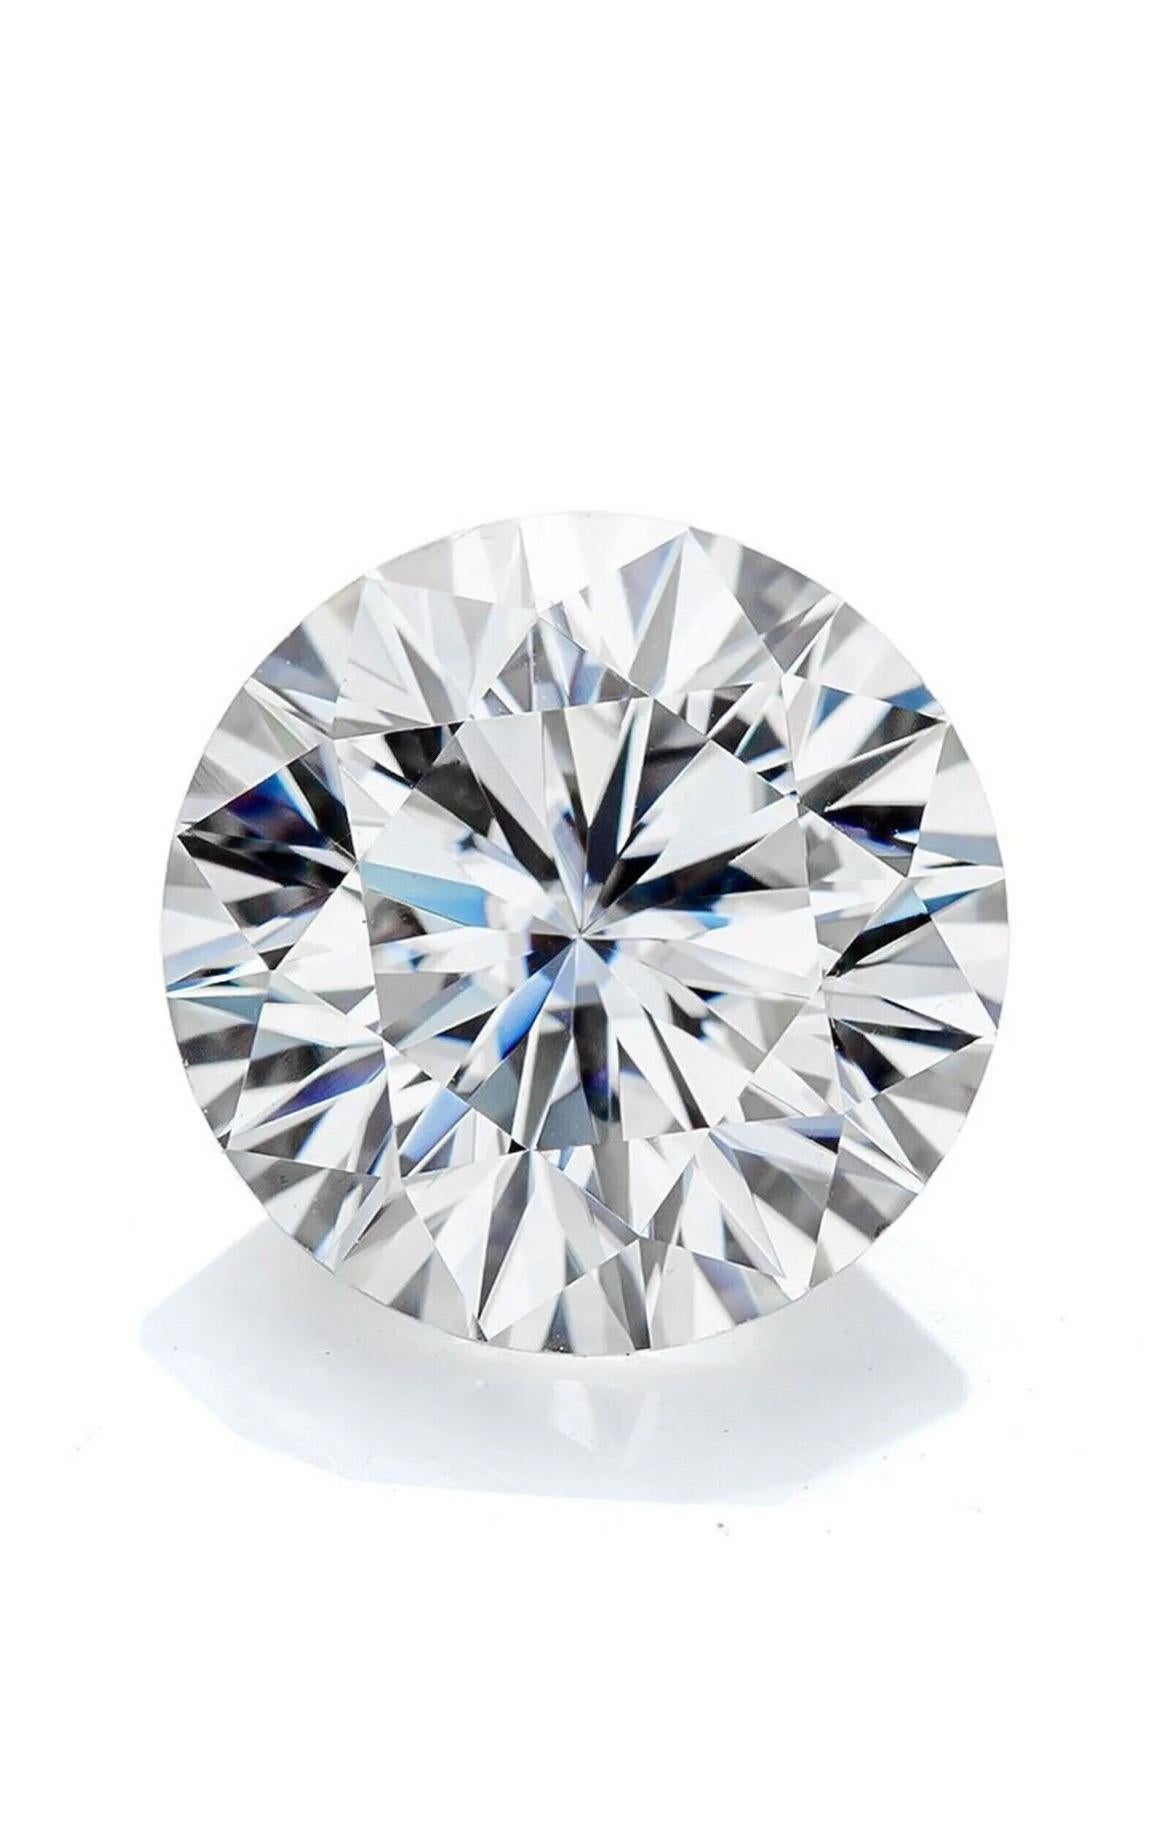 Clarity: Evaluated as P2 (Pique 2), this diamond exhibits noticeable inclusions under 10x magnification, 

Color: With a color grade of H, this diamond displays a near-colorless 

Carat Weight: Weighing 0.46 carats, 

Cut: Featuring a good cut